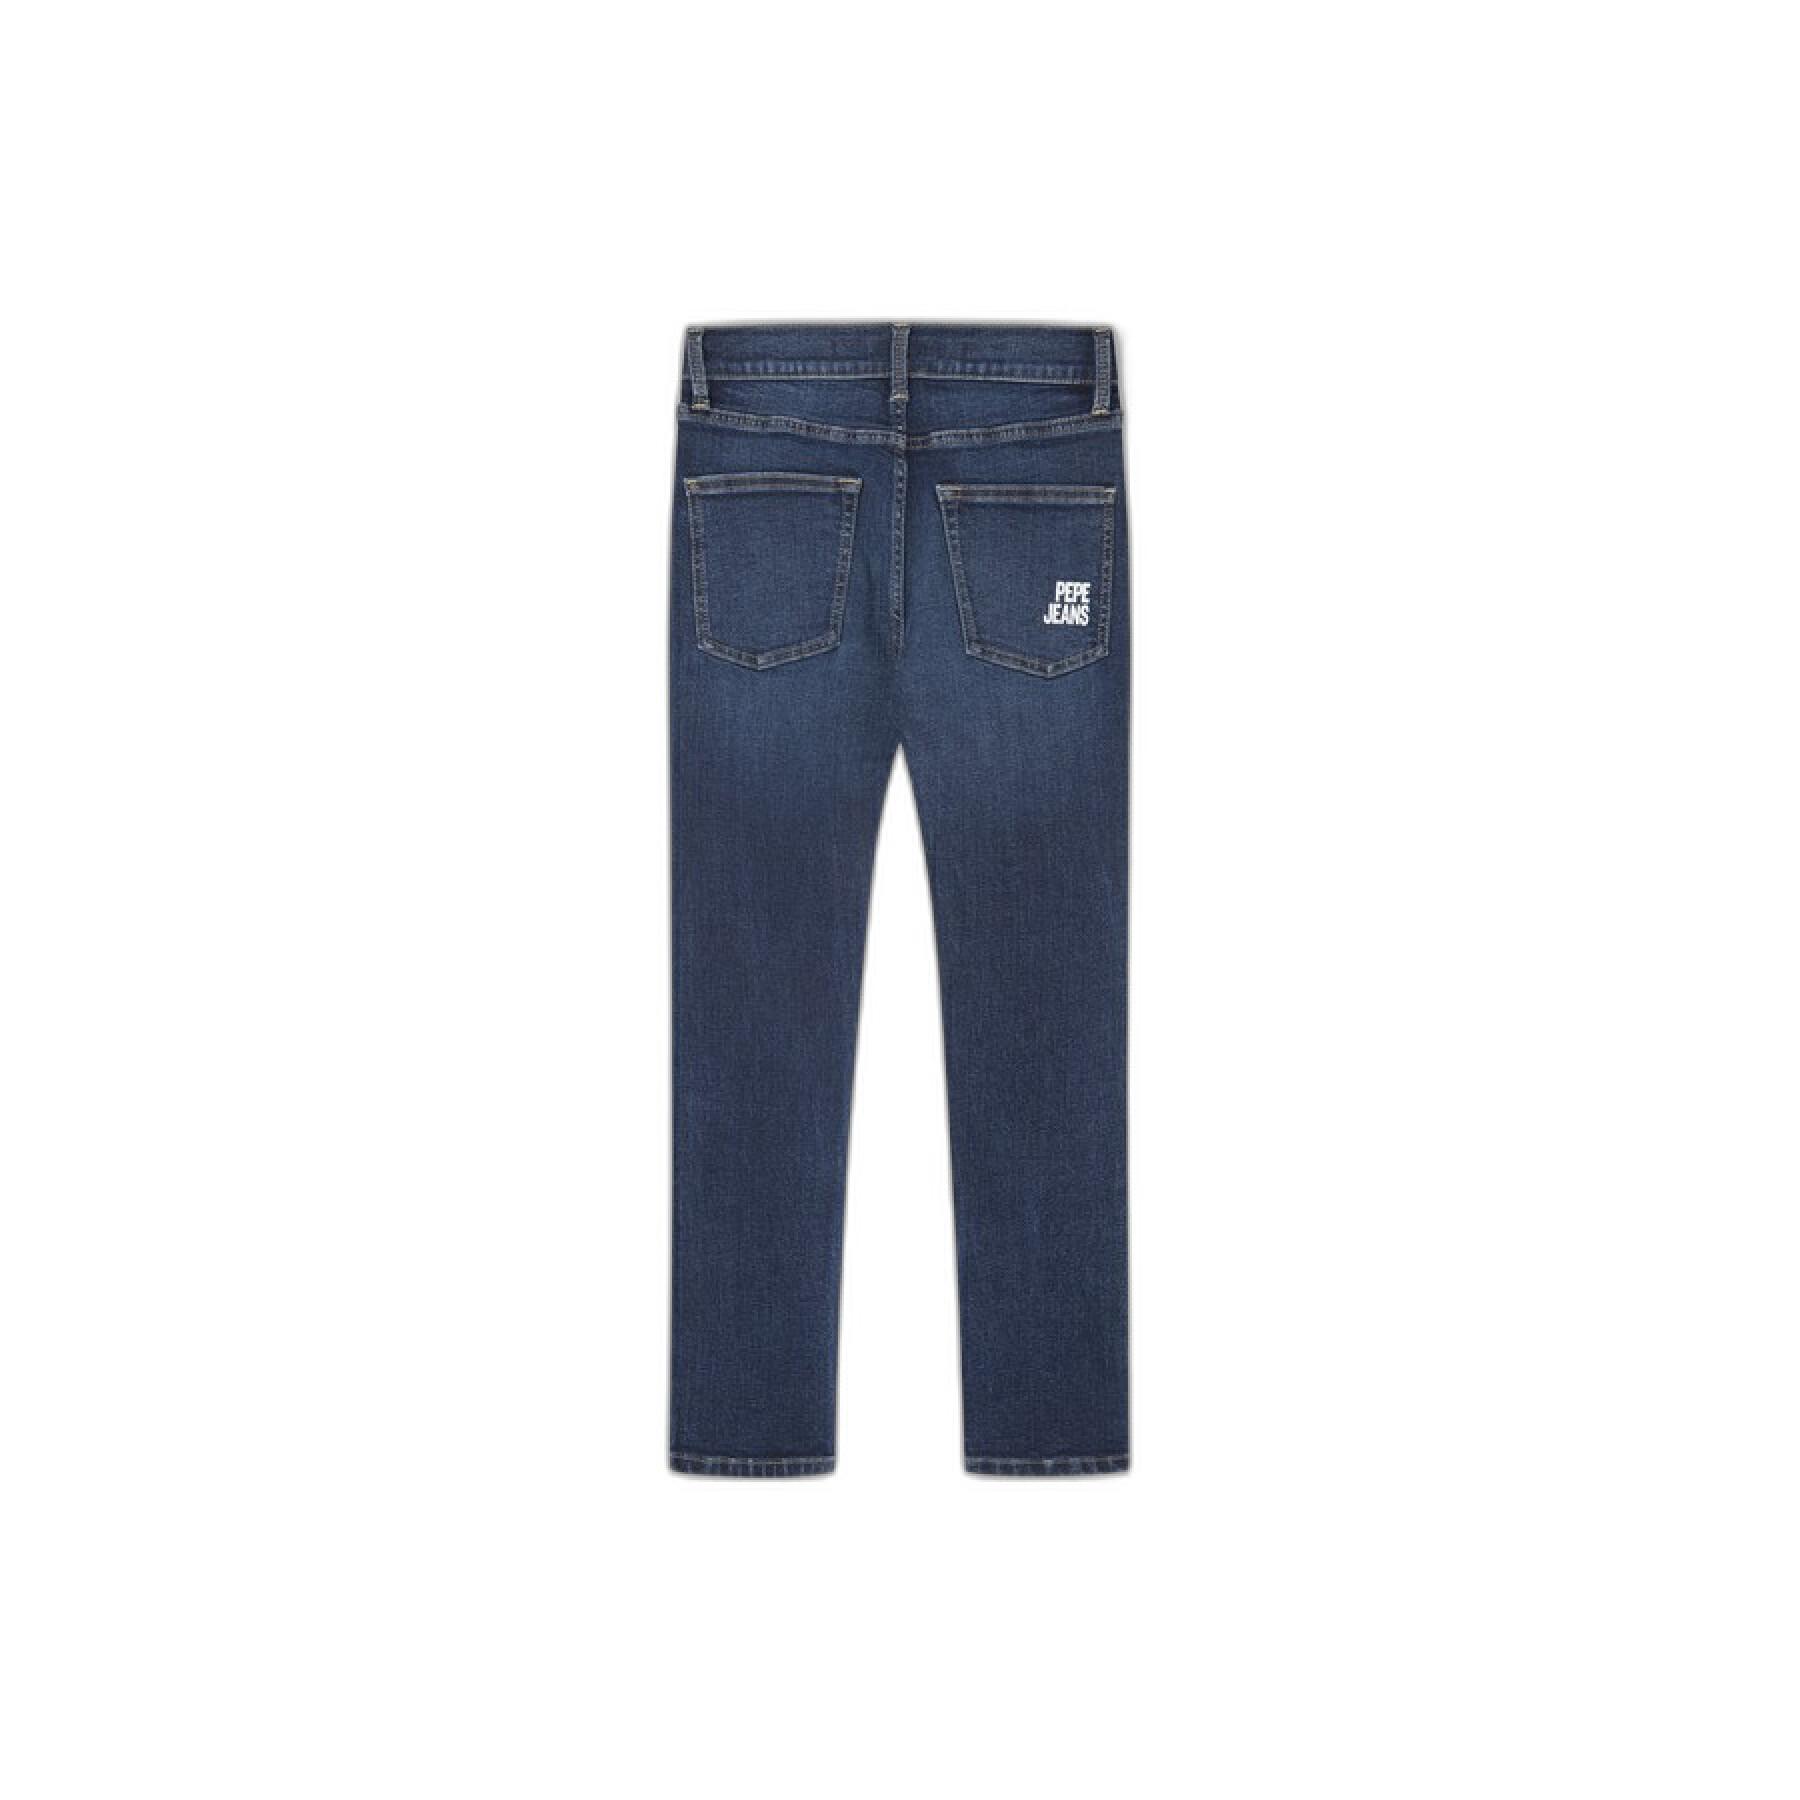 Children's jeans Pepe Jeans Teo